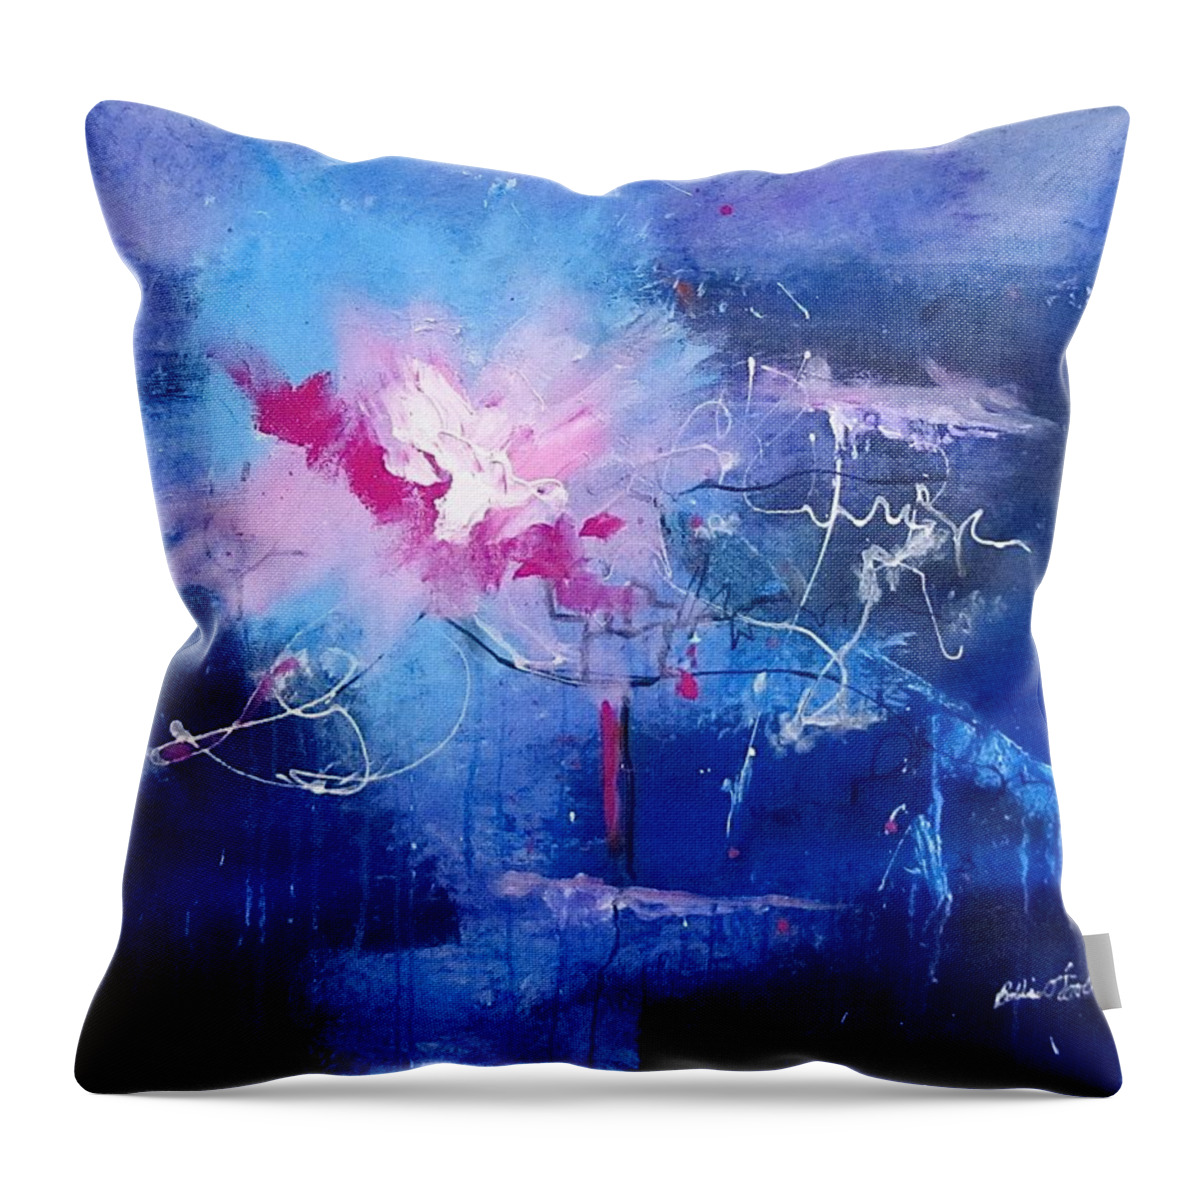 Galaxy Throw Pillow featuring the painting To Light The Way by Barbara O'Toole